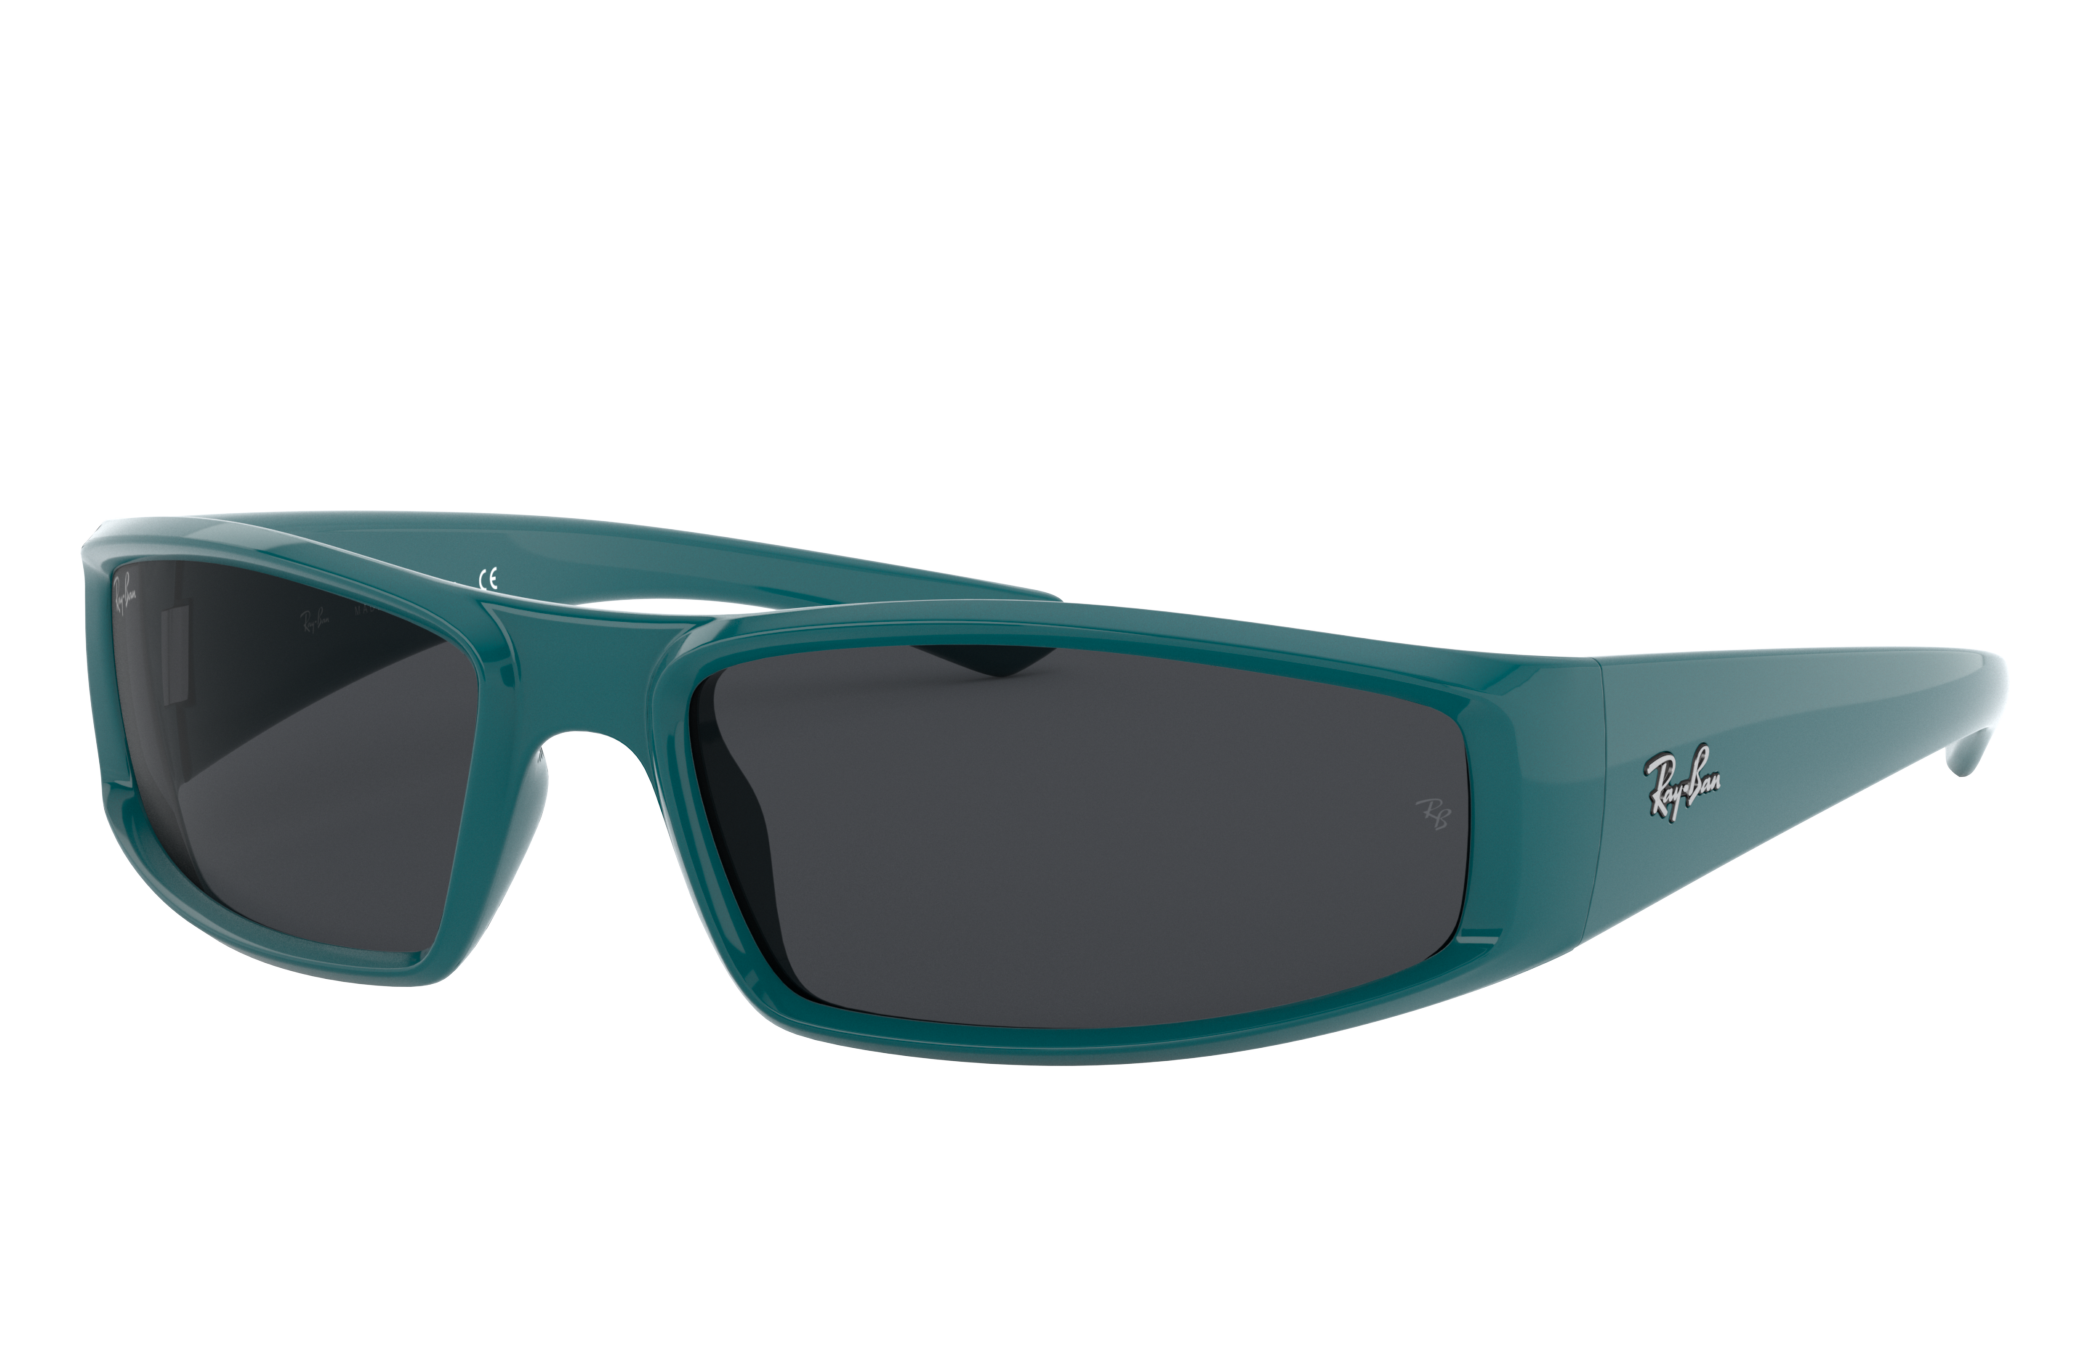 Rb4335 Sunglasses in Turquoise and Grey | Ray-Ban®